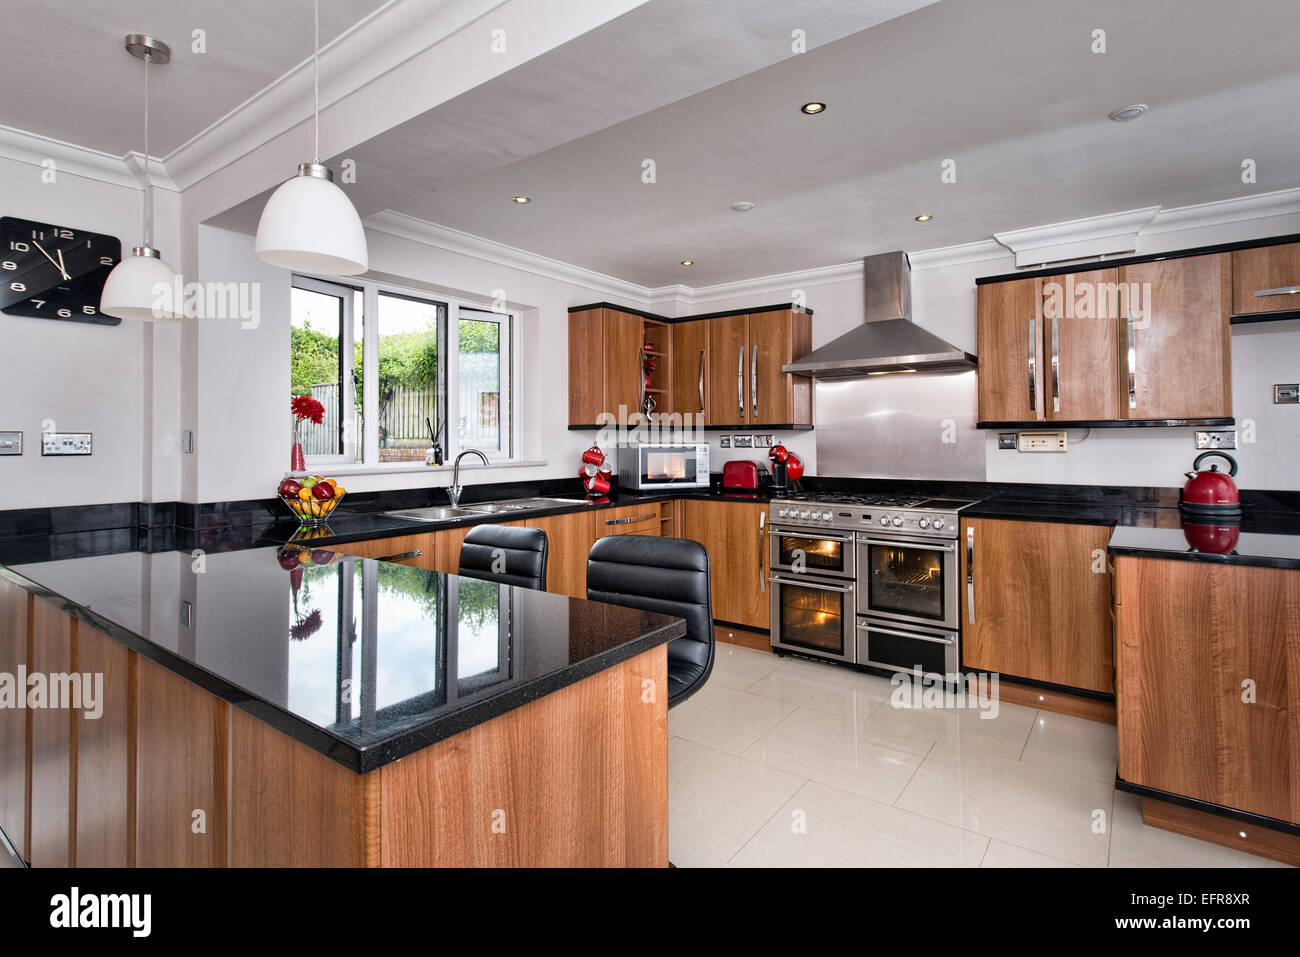 An interior of a modern UK home showing the kitchen area Stock Photo